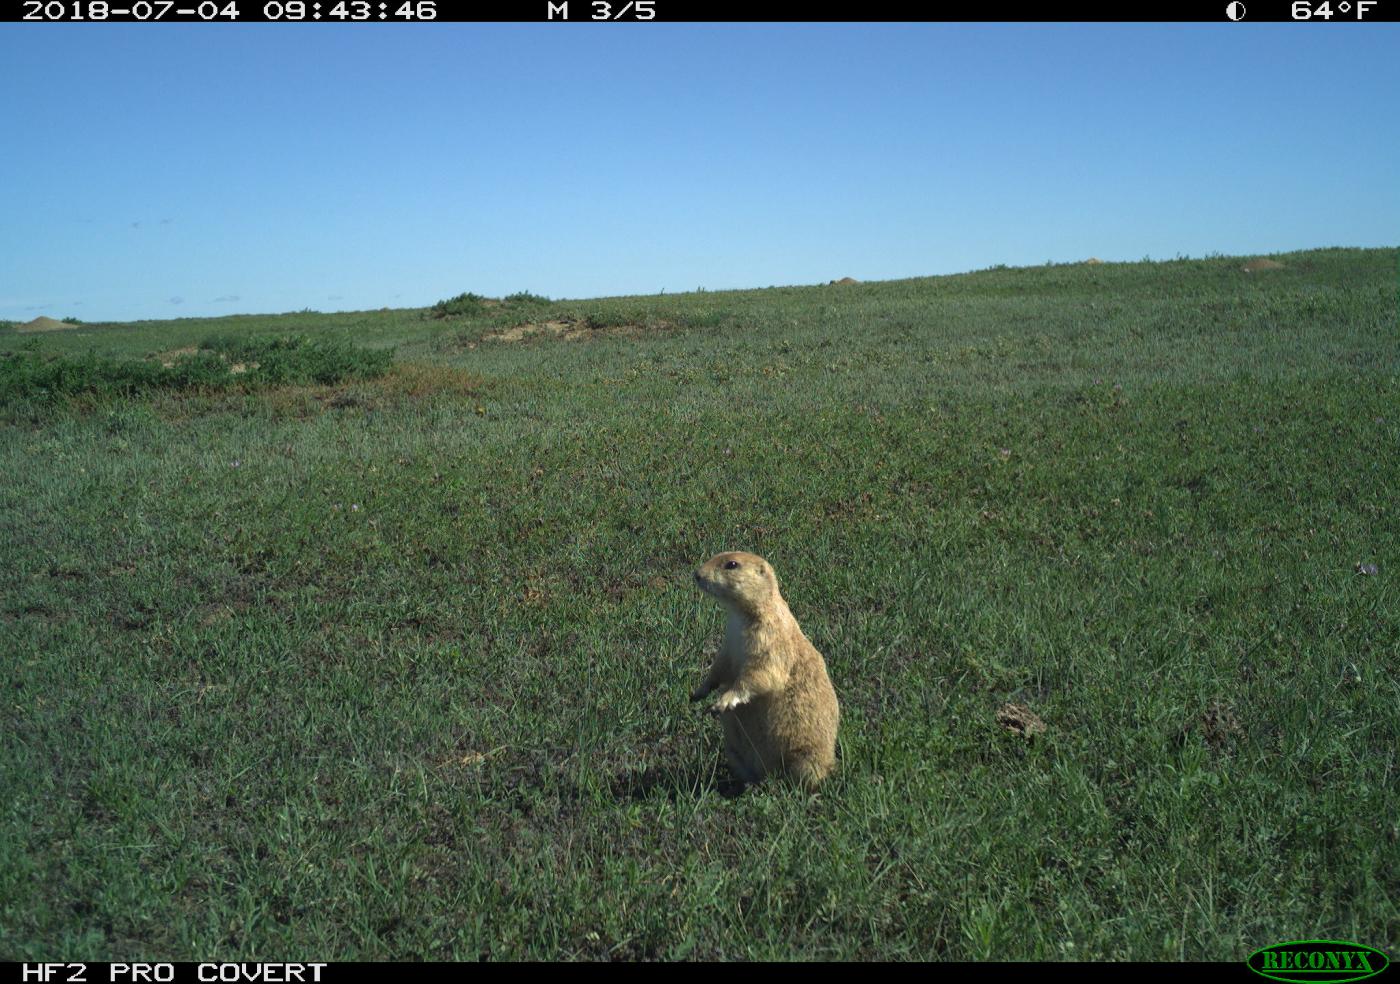 A black-tailed prairie dog (Cynomys ludovicianus) standing on its hind legs in the grass caught on film by a camera trap in the American Prairie Reserve in Montana